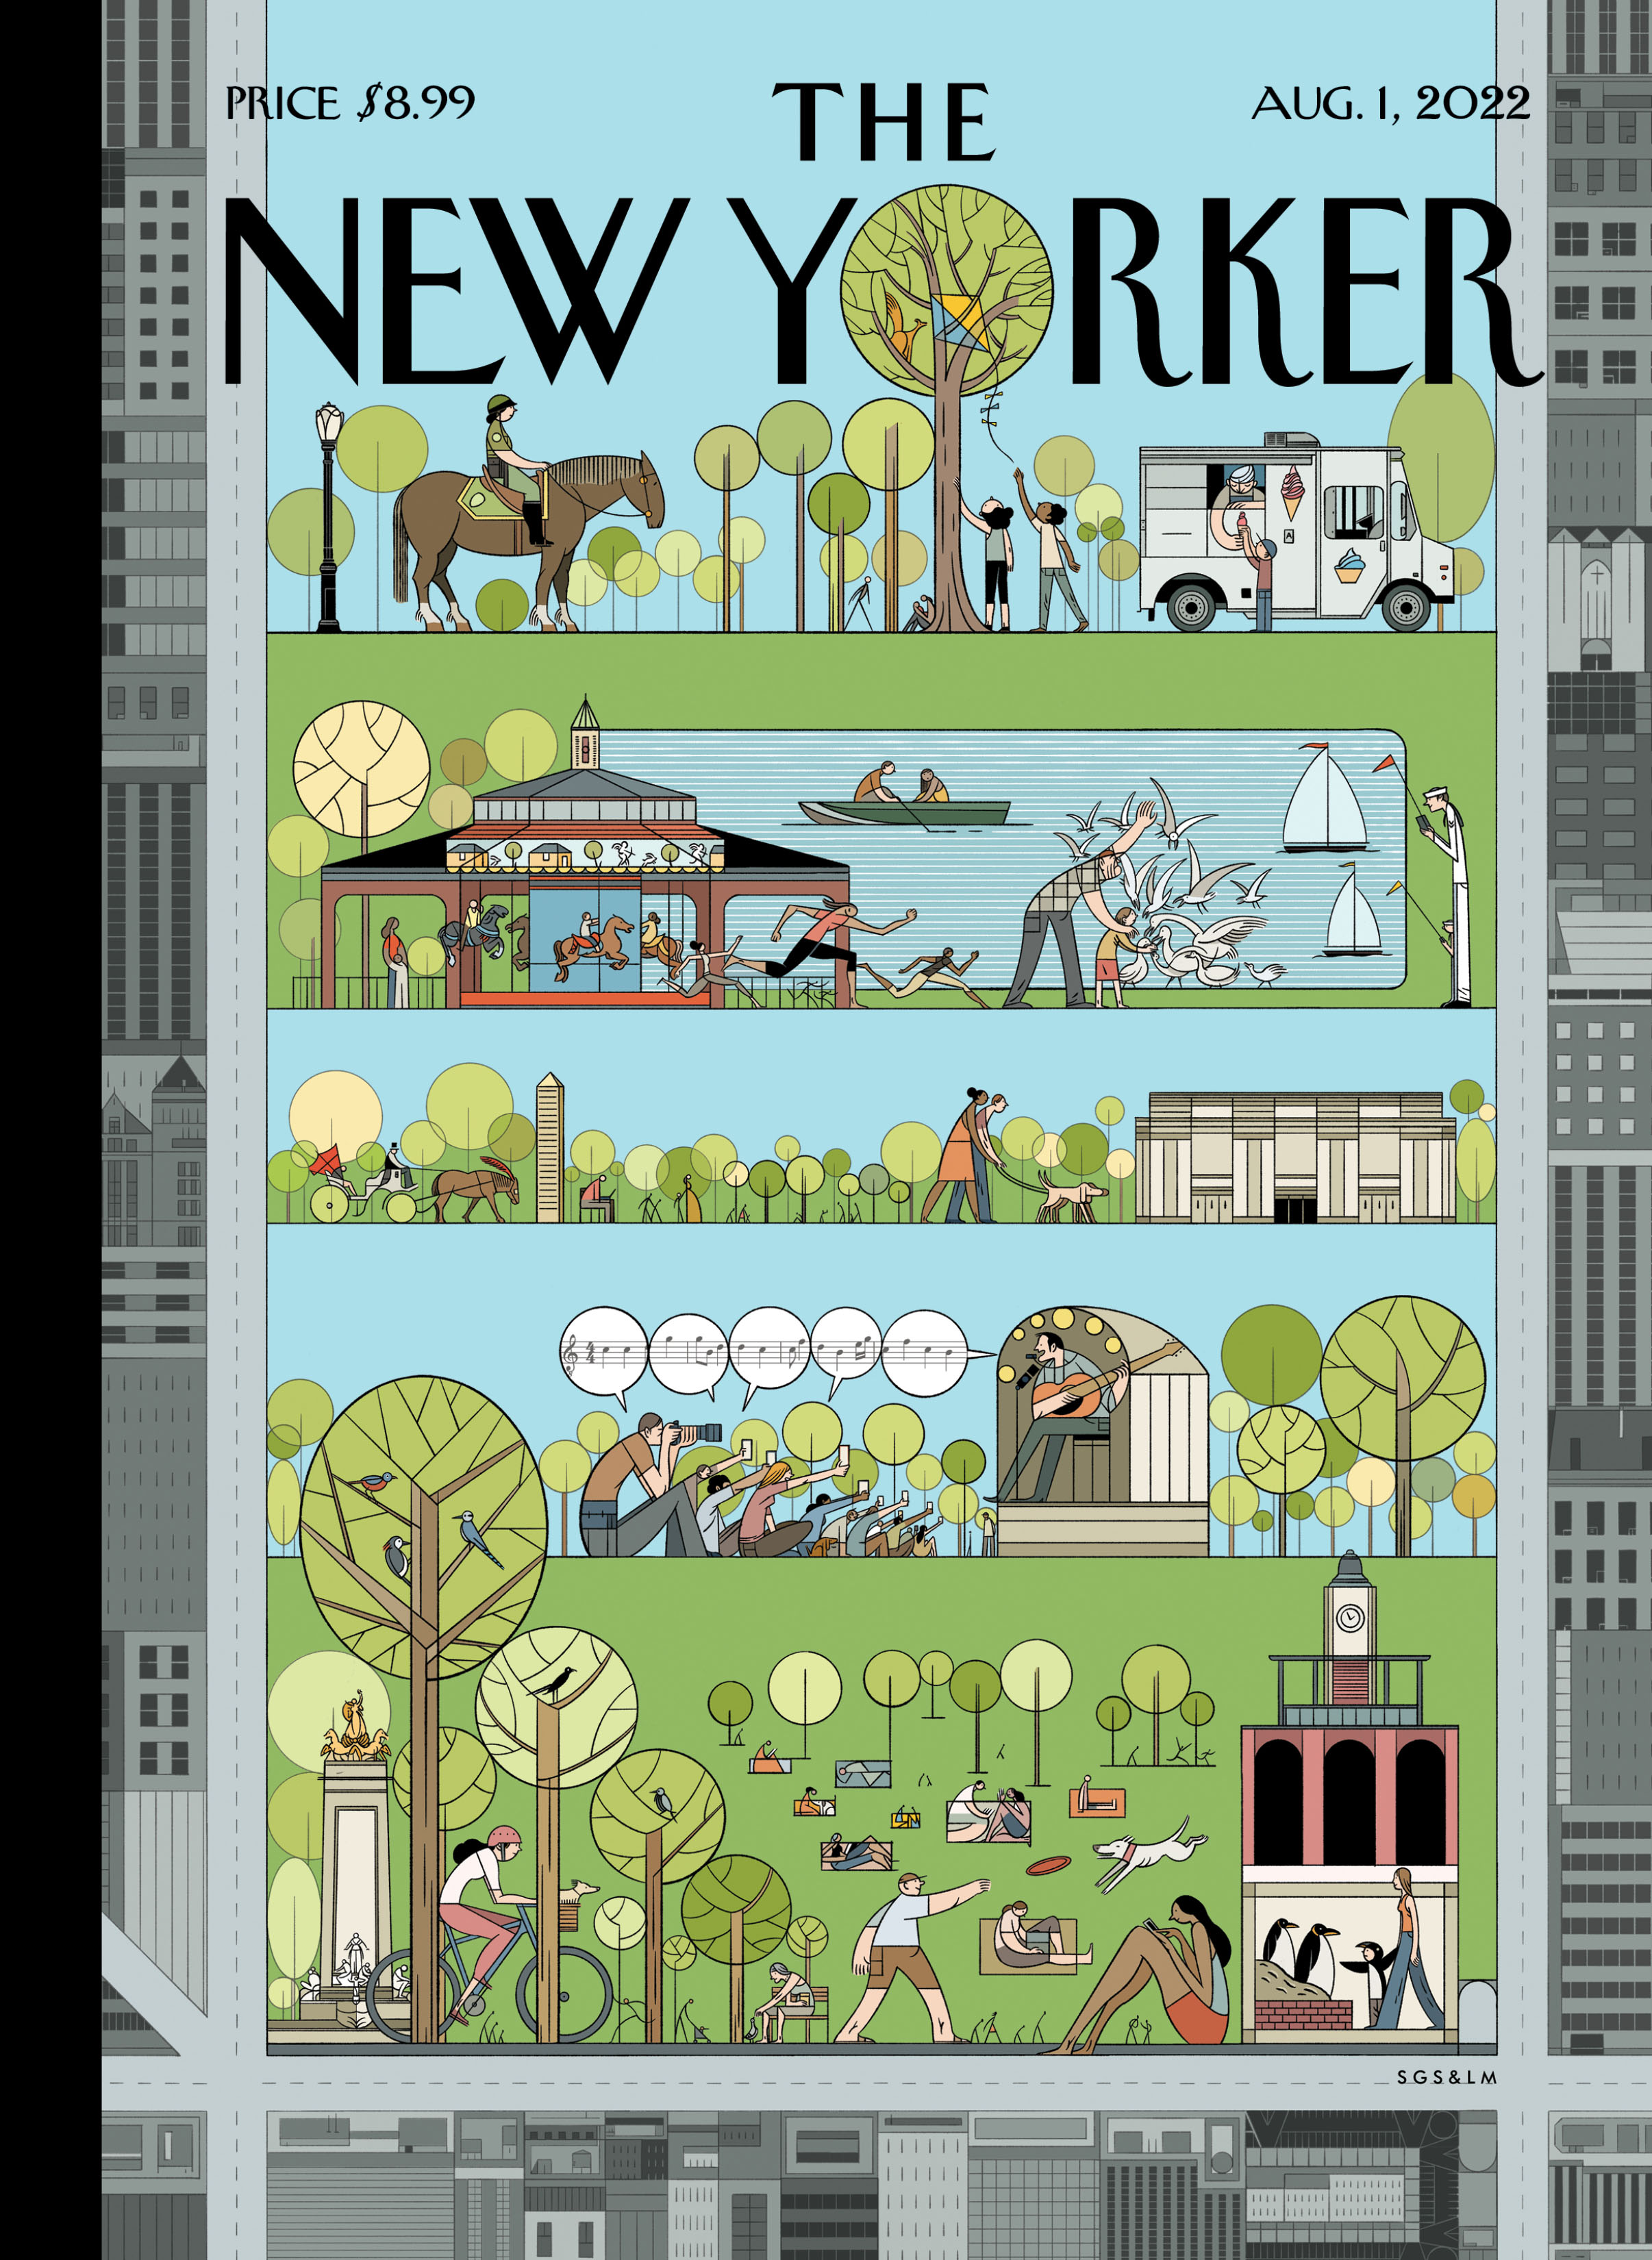 The New Yorker - Reporting